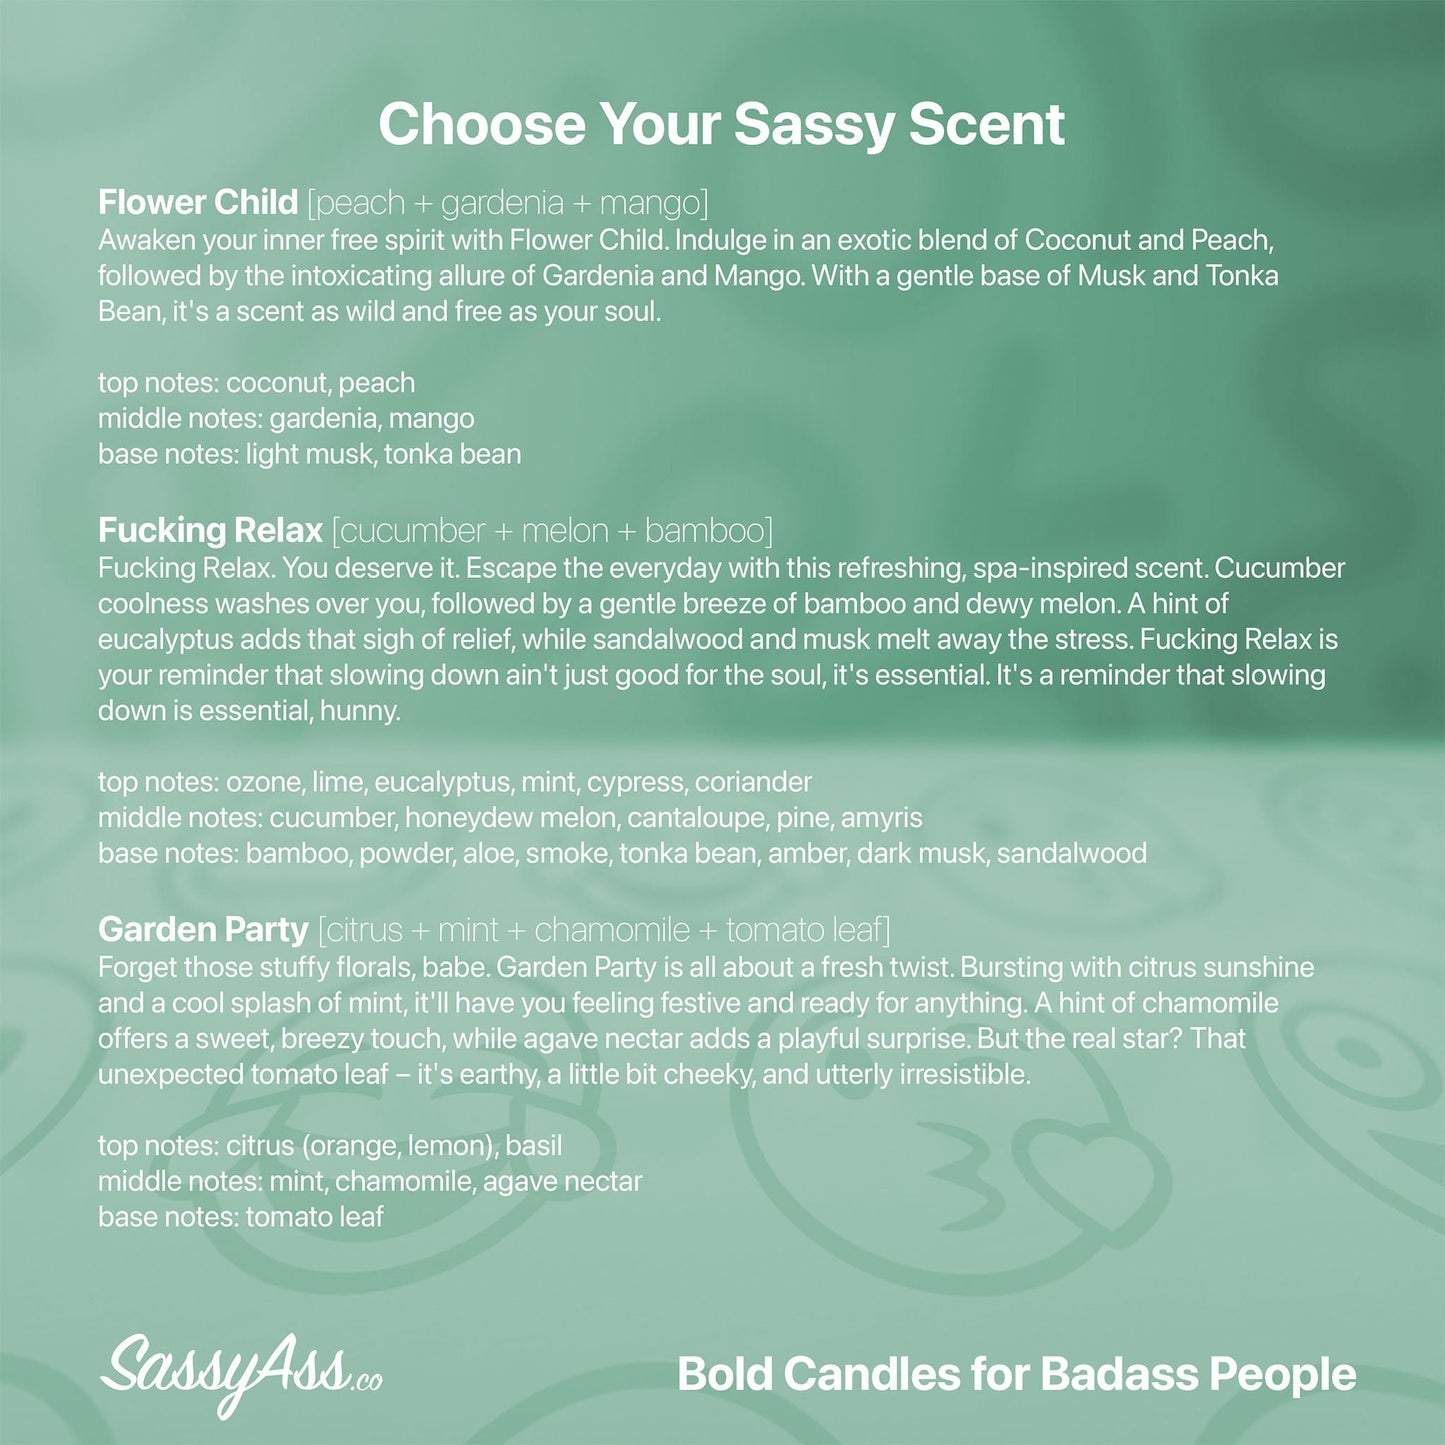 Entering My Good Witch Era - Scented Soy Candle, Enchanting Witchy Vibes & Magickal Experience - the back cover of the book choose your sassy scent - SassyAss.co